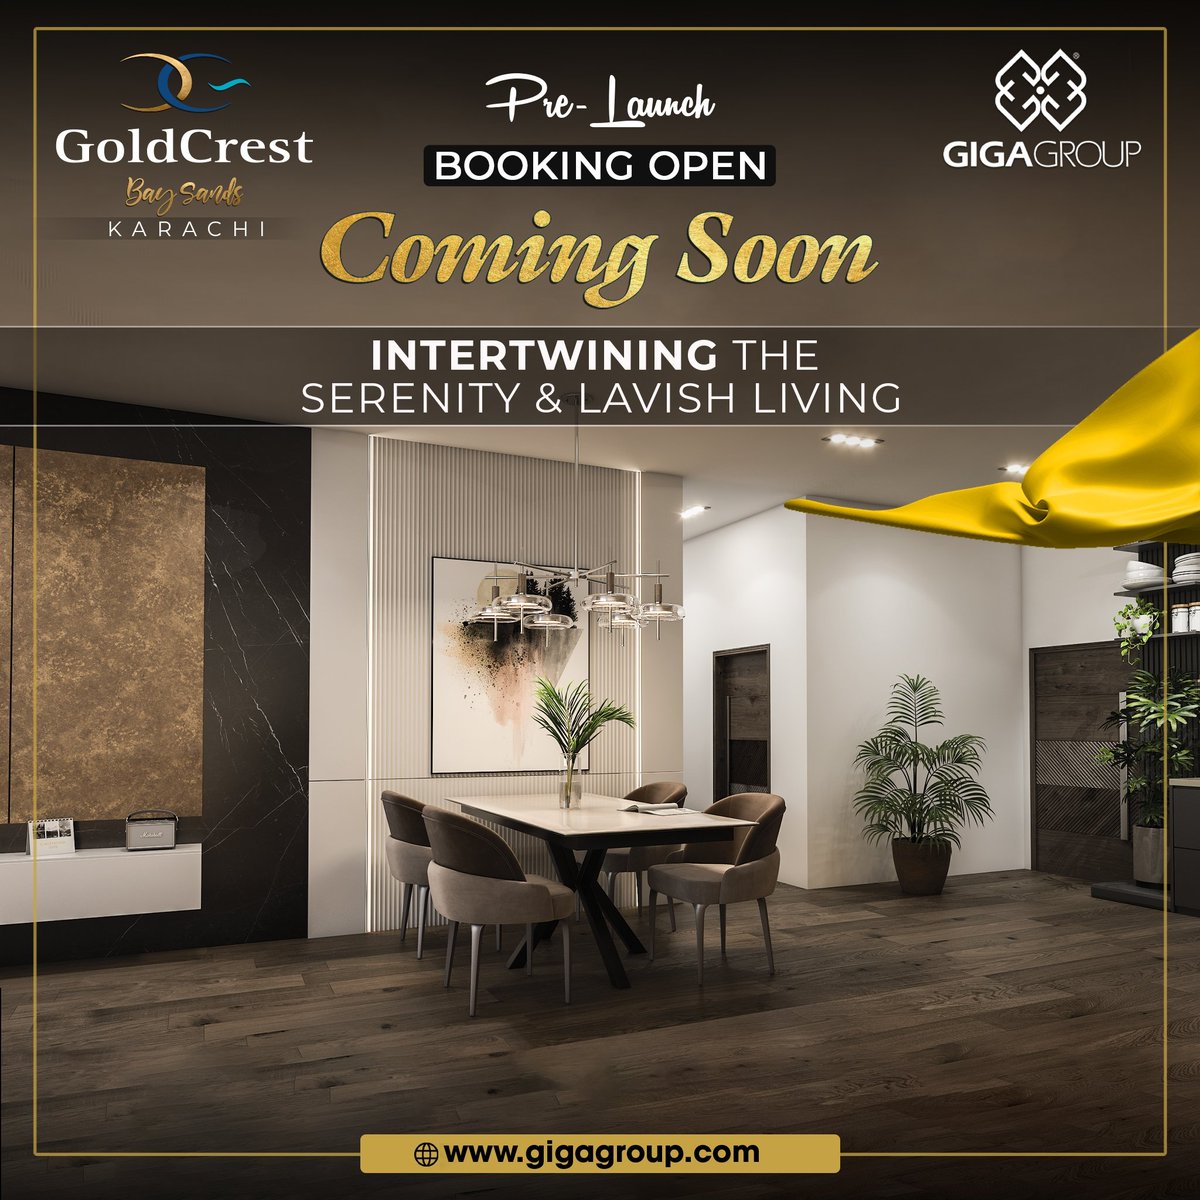 𝐀𝐯𝐚𝐢𝐥 𝐭𝐡𝐞 𝐏𝐫𝐞-𝐋𝐚𝐮𝐧𝐜𝐡 𝐎𝐟𝐟𝐞𝐫! Intertwining the serenity & lavish living! Coming Soon - 𝐆𝐨𝐥𝐝𝐜𝐫𝐞𝐬𝐭 𝐁𝐚𝐲 𝐒𝐚𝐧𝐝𝐬 𝐊𝐚𝐫𝐚𝐜𝐡𝐢 - HMR Waterfront For more details call us at 𝑼𝑨𝑵: 0304 111 0073 or visit 𝑾𝒆𝒃𝒔𝒊𝒕𝒆: gigagroup.com/project/goldcr… . .…